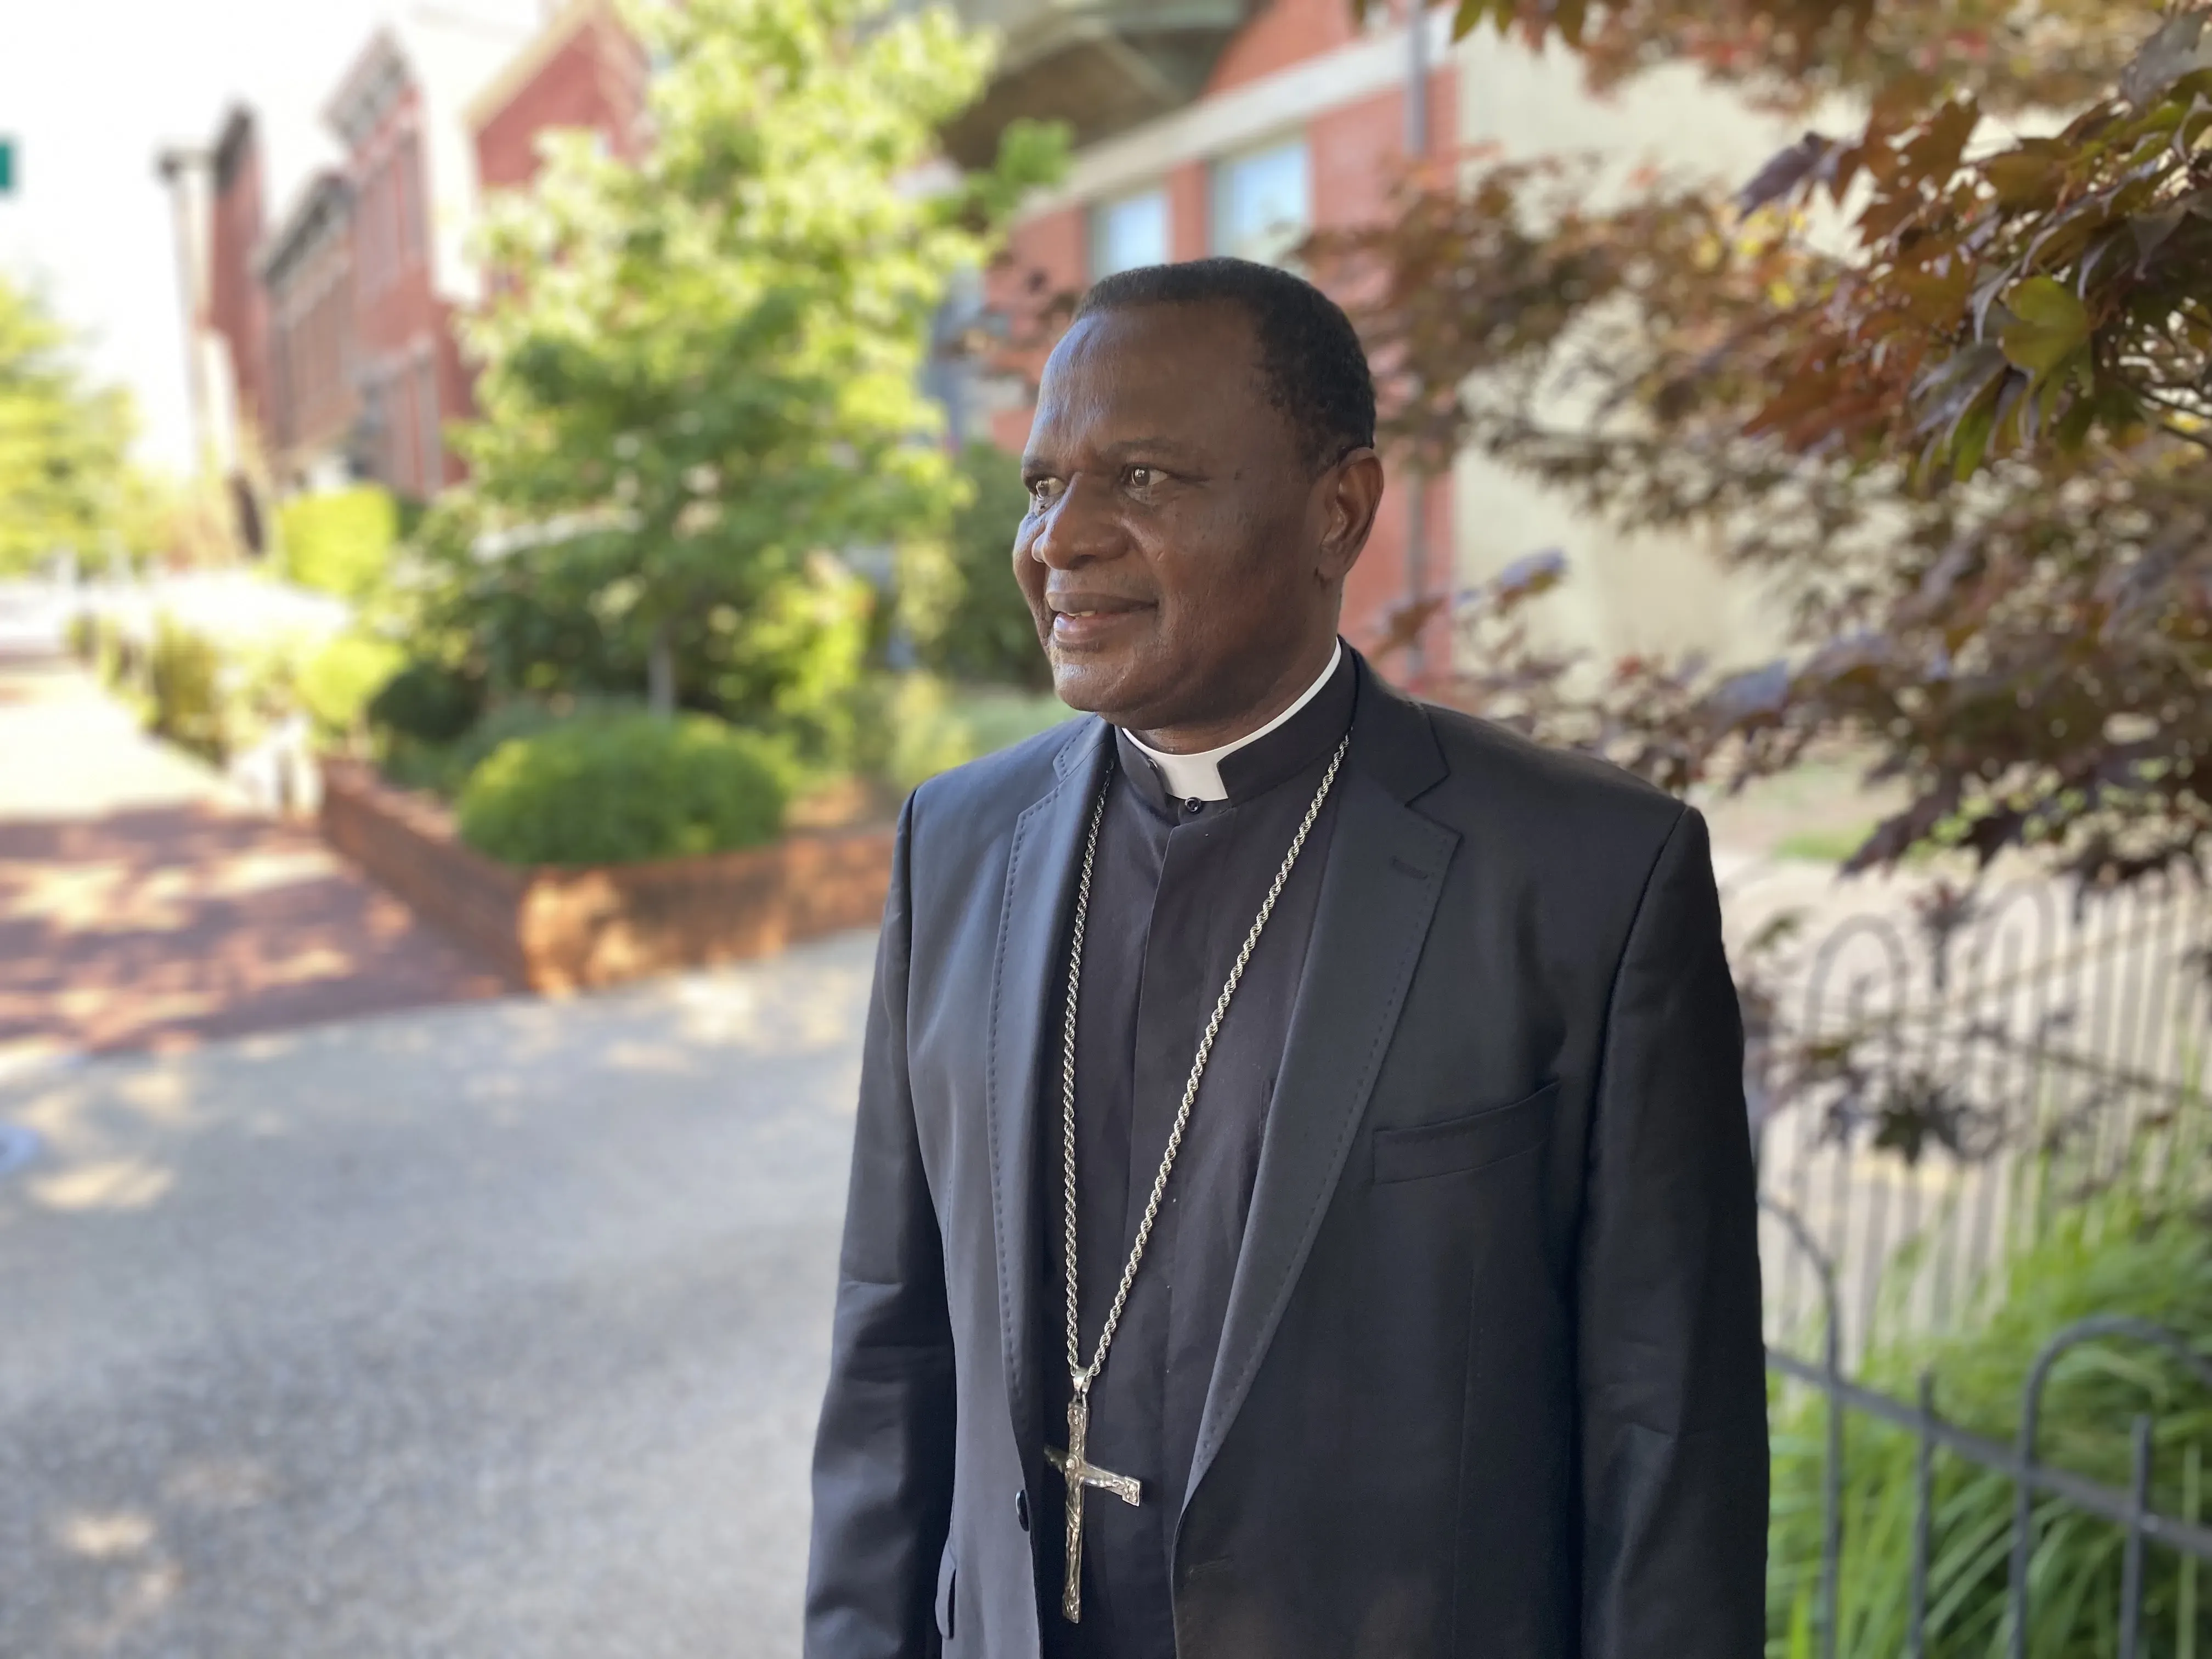 Bishop Jude Arogundade in Washington, D.C., on June 30, 2022 outside the Belmont House, where he attended a breakfast social with U.S. congressmen and religious freedom advocates. Shannon Mullen/CNA